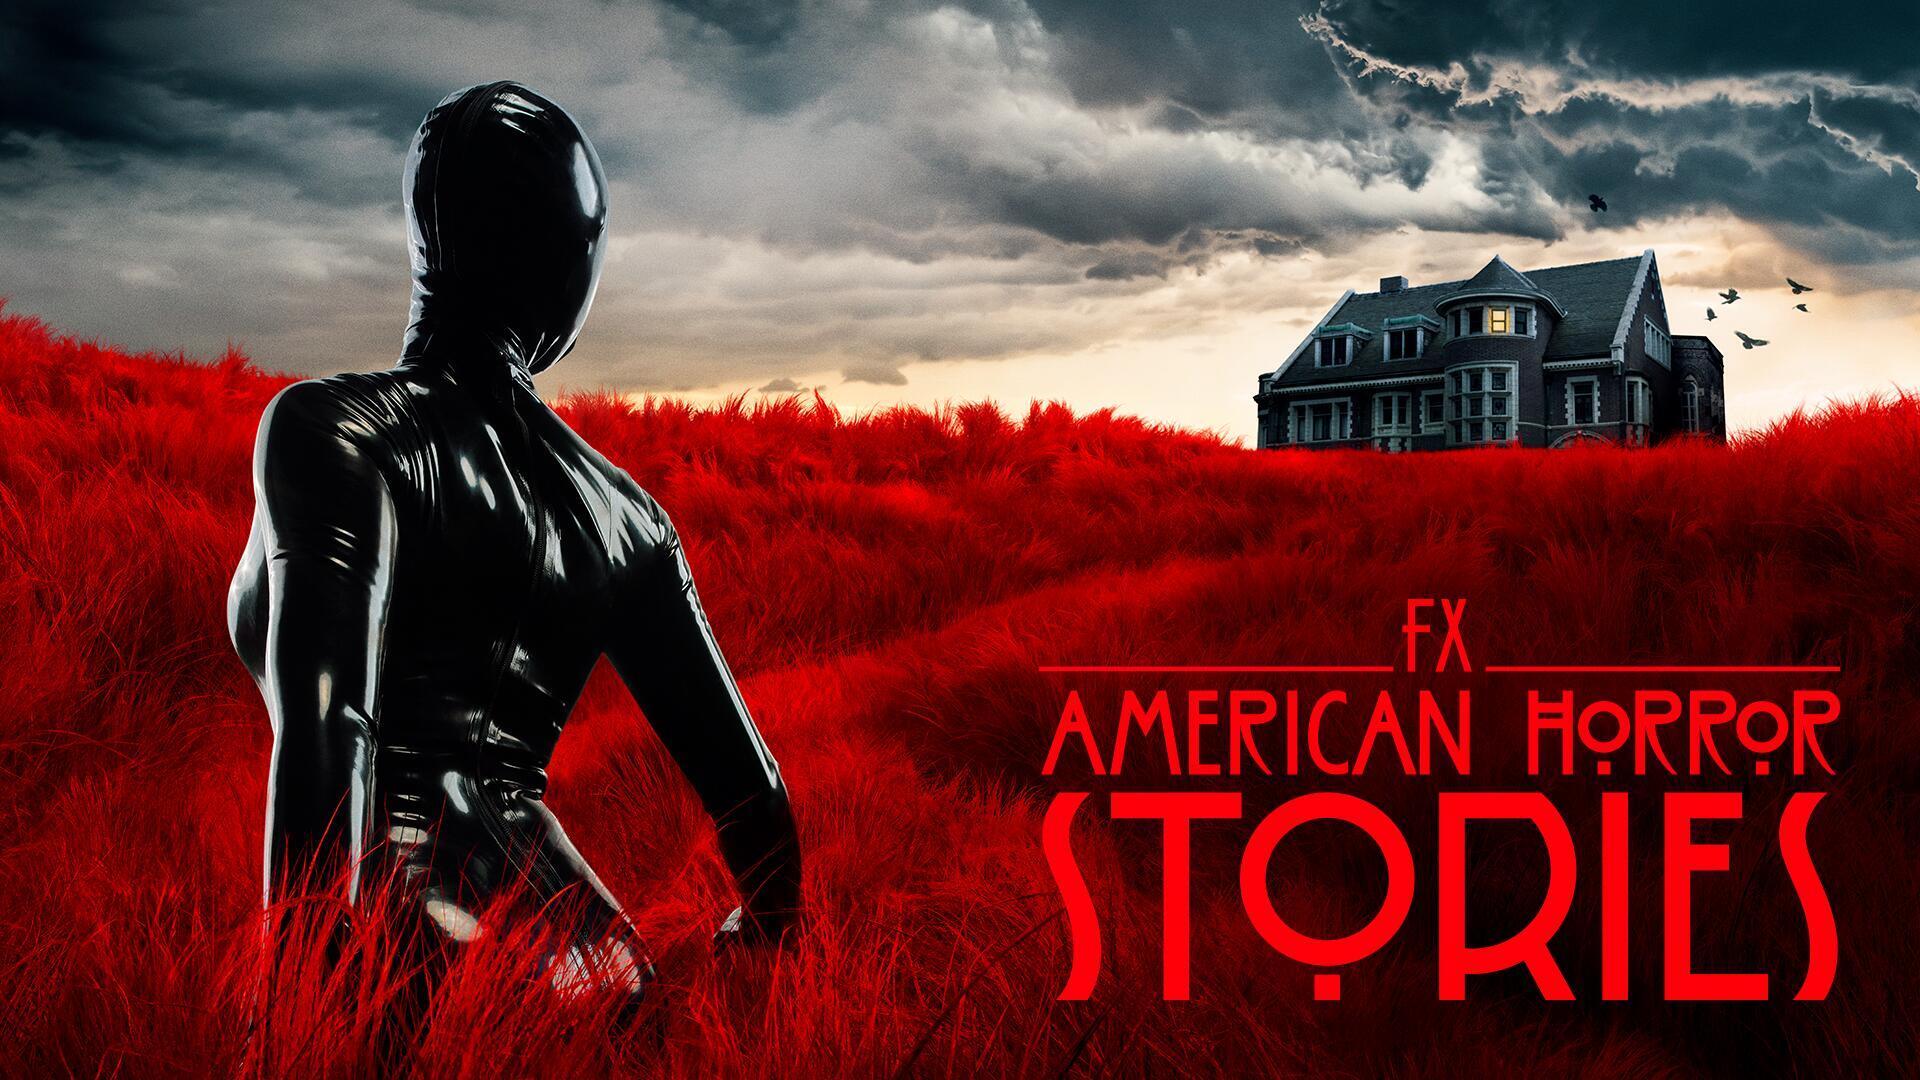 'American Horror Stories' black and red logo, the spinoff of 'American Horror Story' from Ryan Murphy